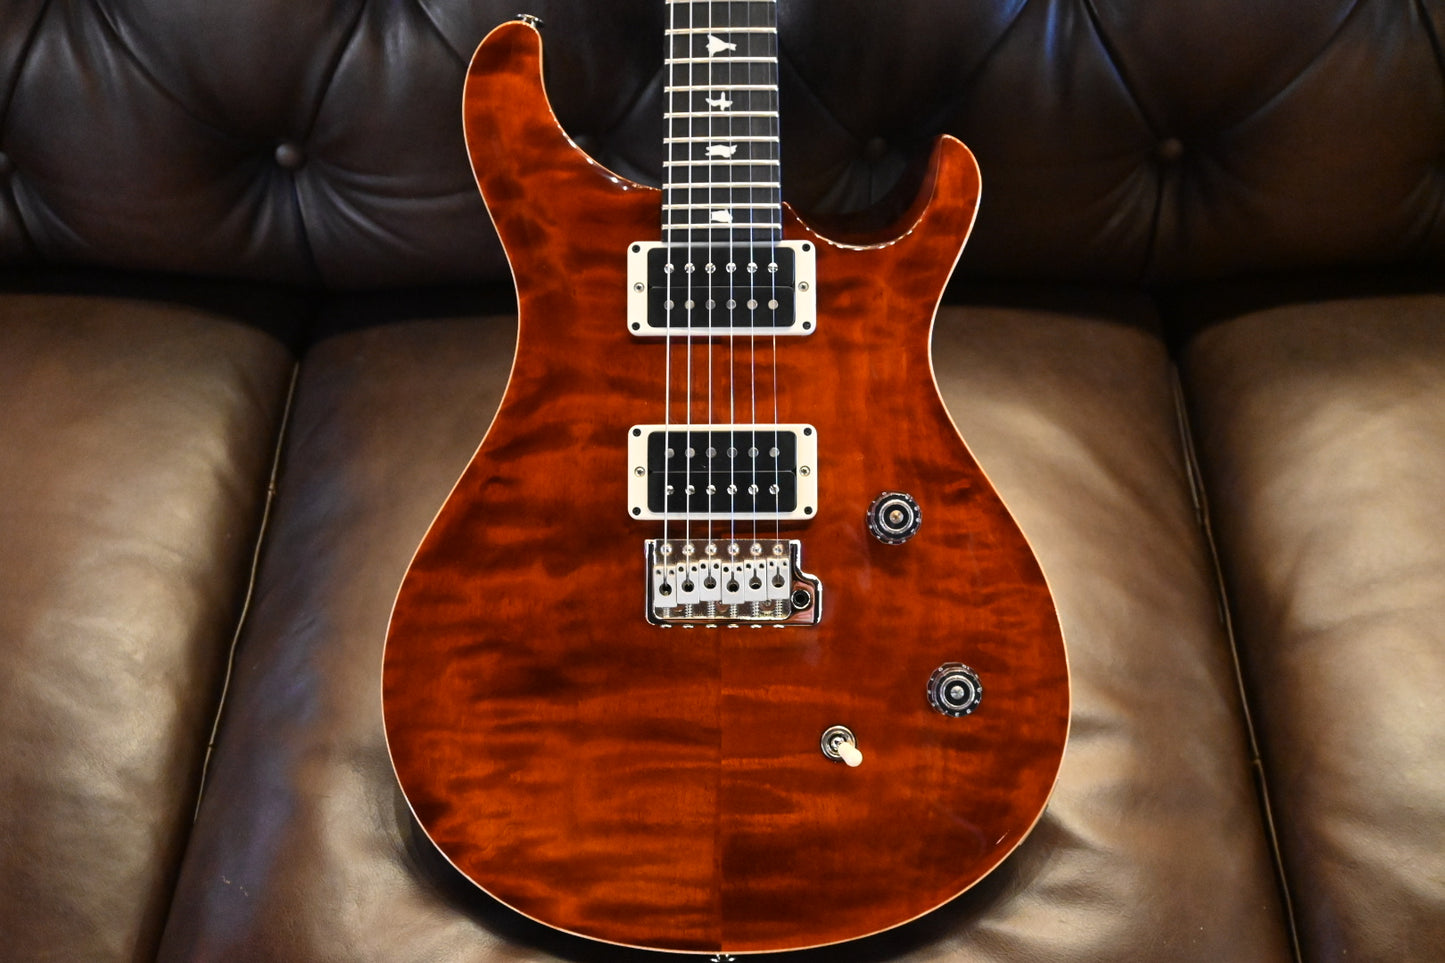 PRS Wood Library CE 24 Quilt - Tortoise Shell Guitar #7608 - Danville Music